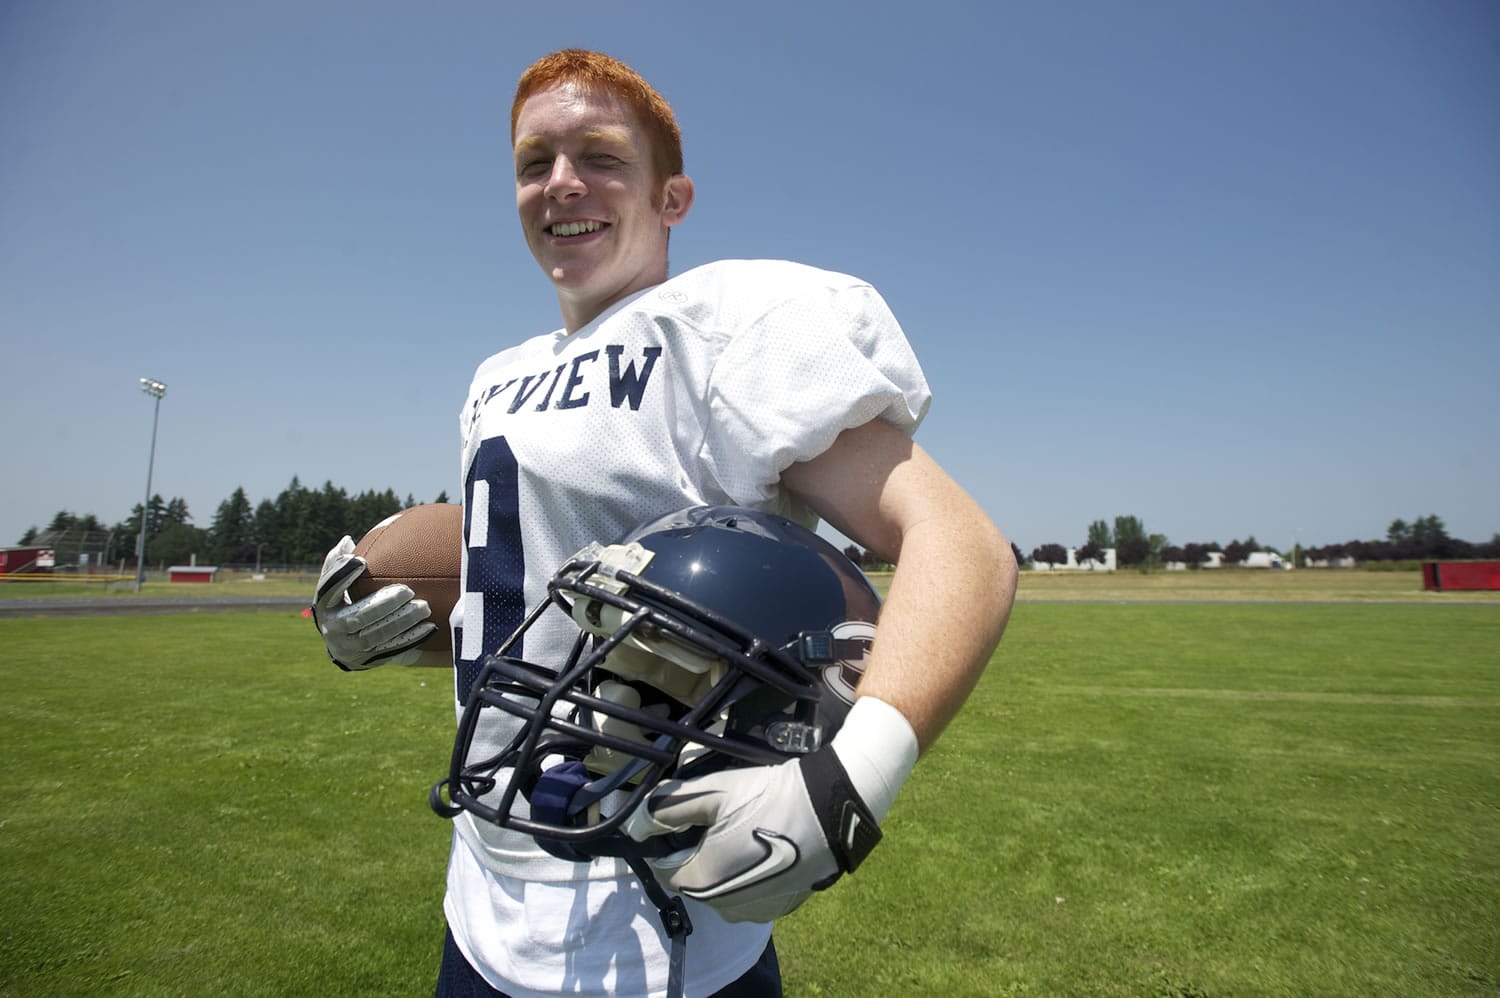 Hayden Schuh plans to walk on to the University of Washington football team after playing one final game as a representative of Skyview High School.